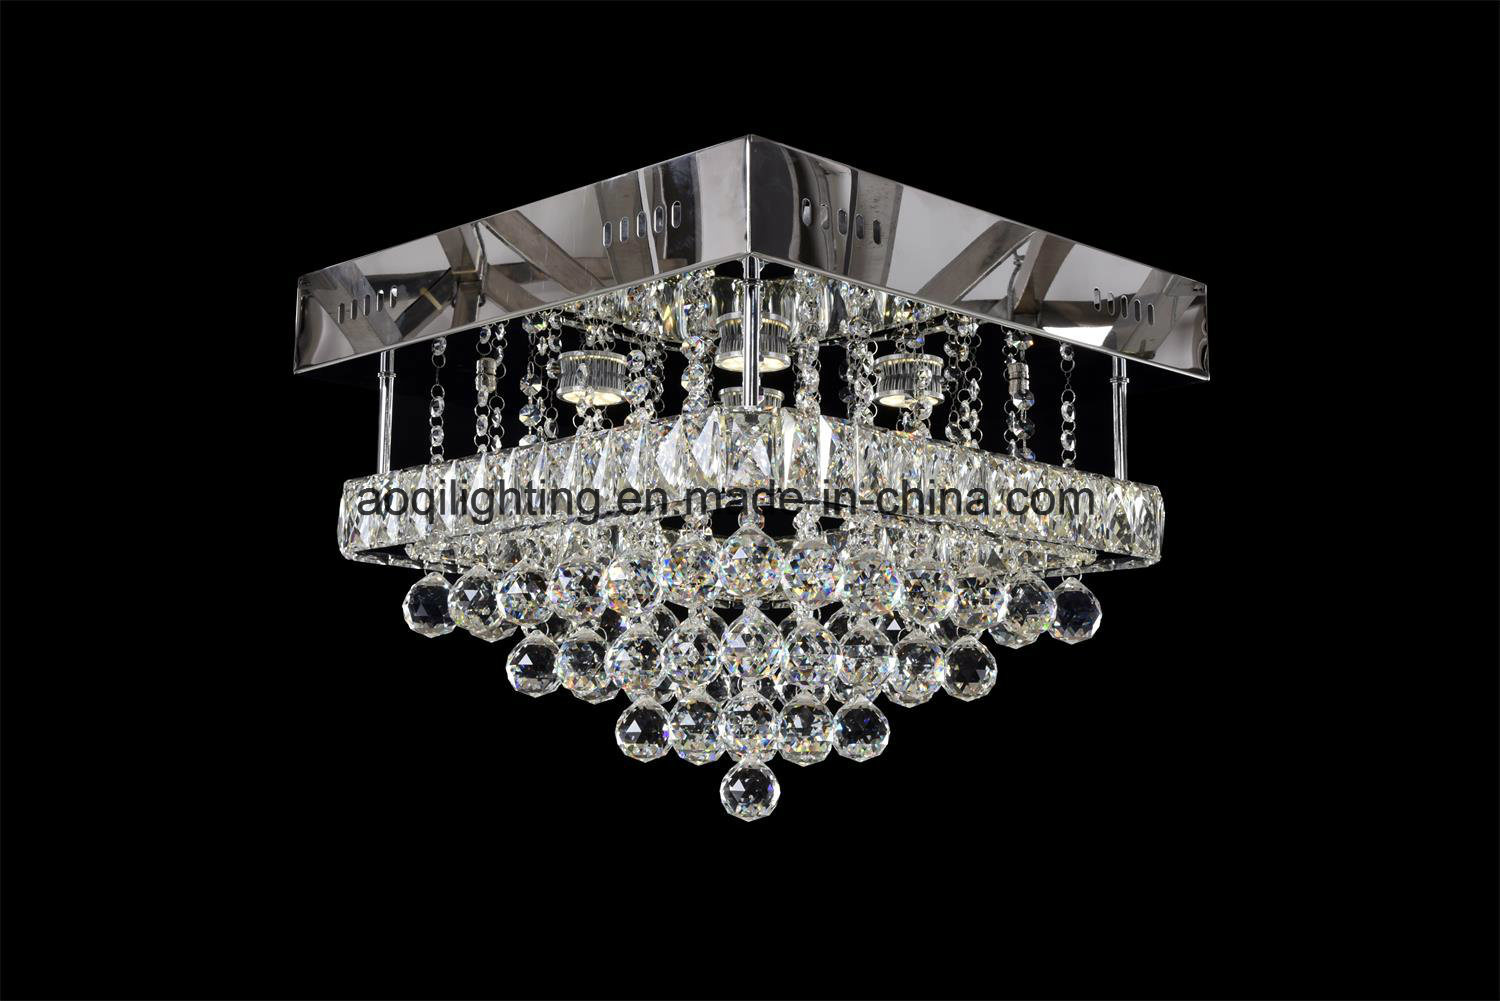 Fashionable Style LED Decorative ceiling Light for Homing